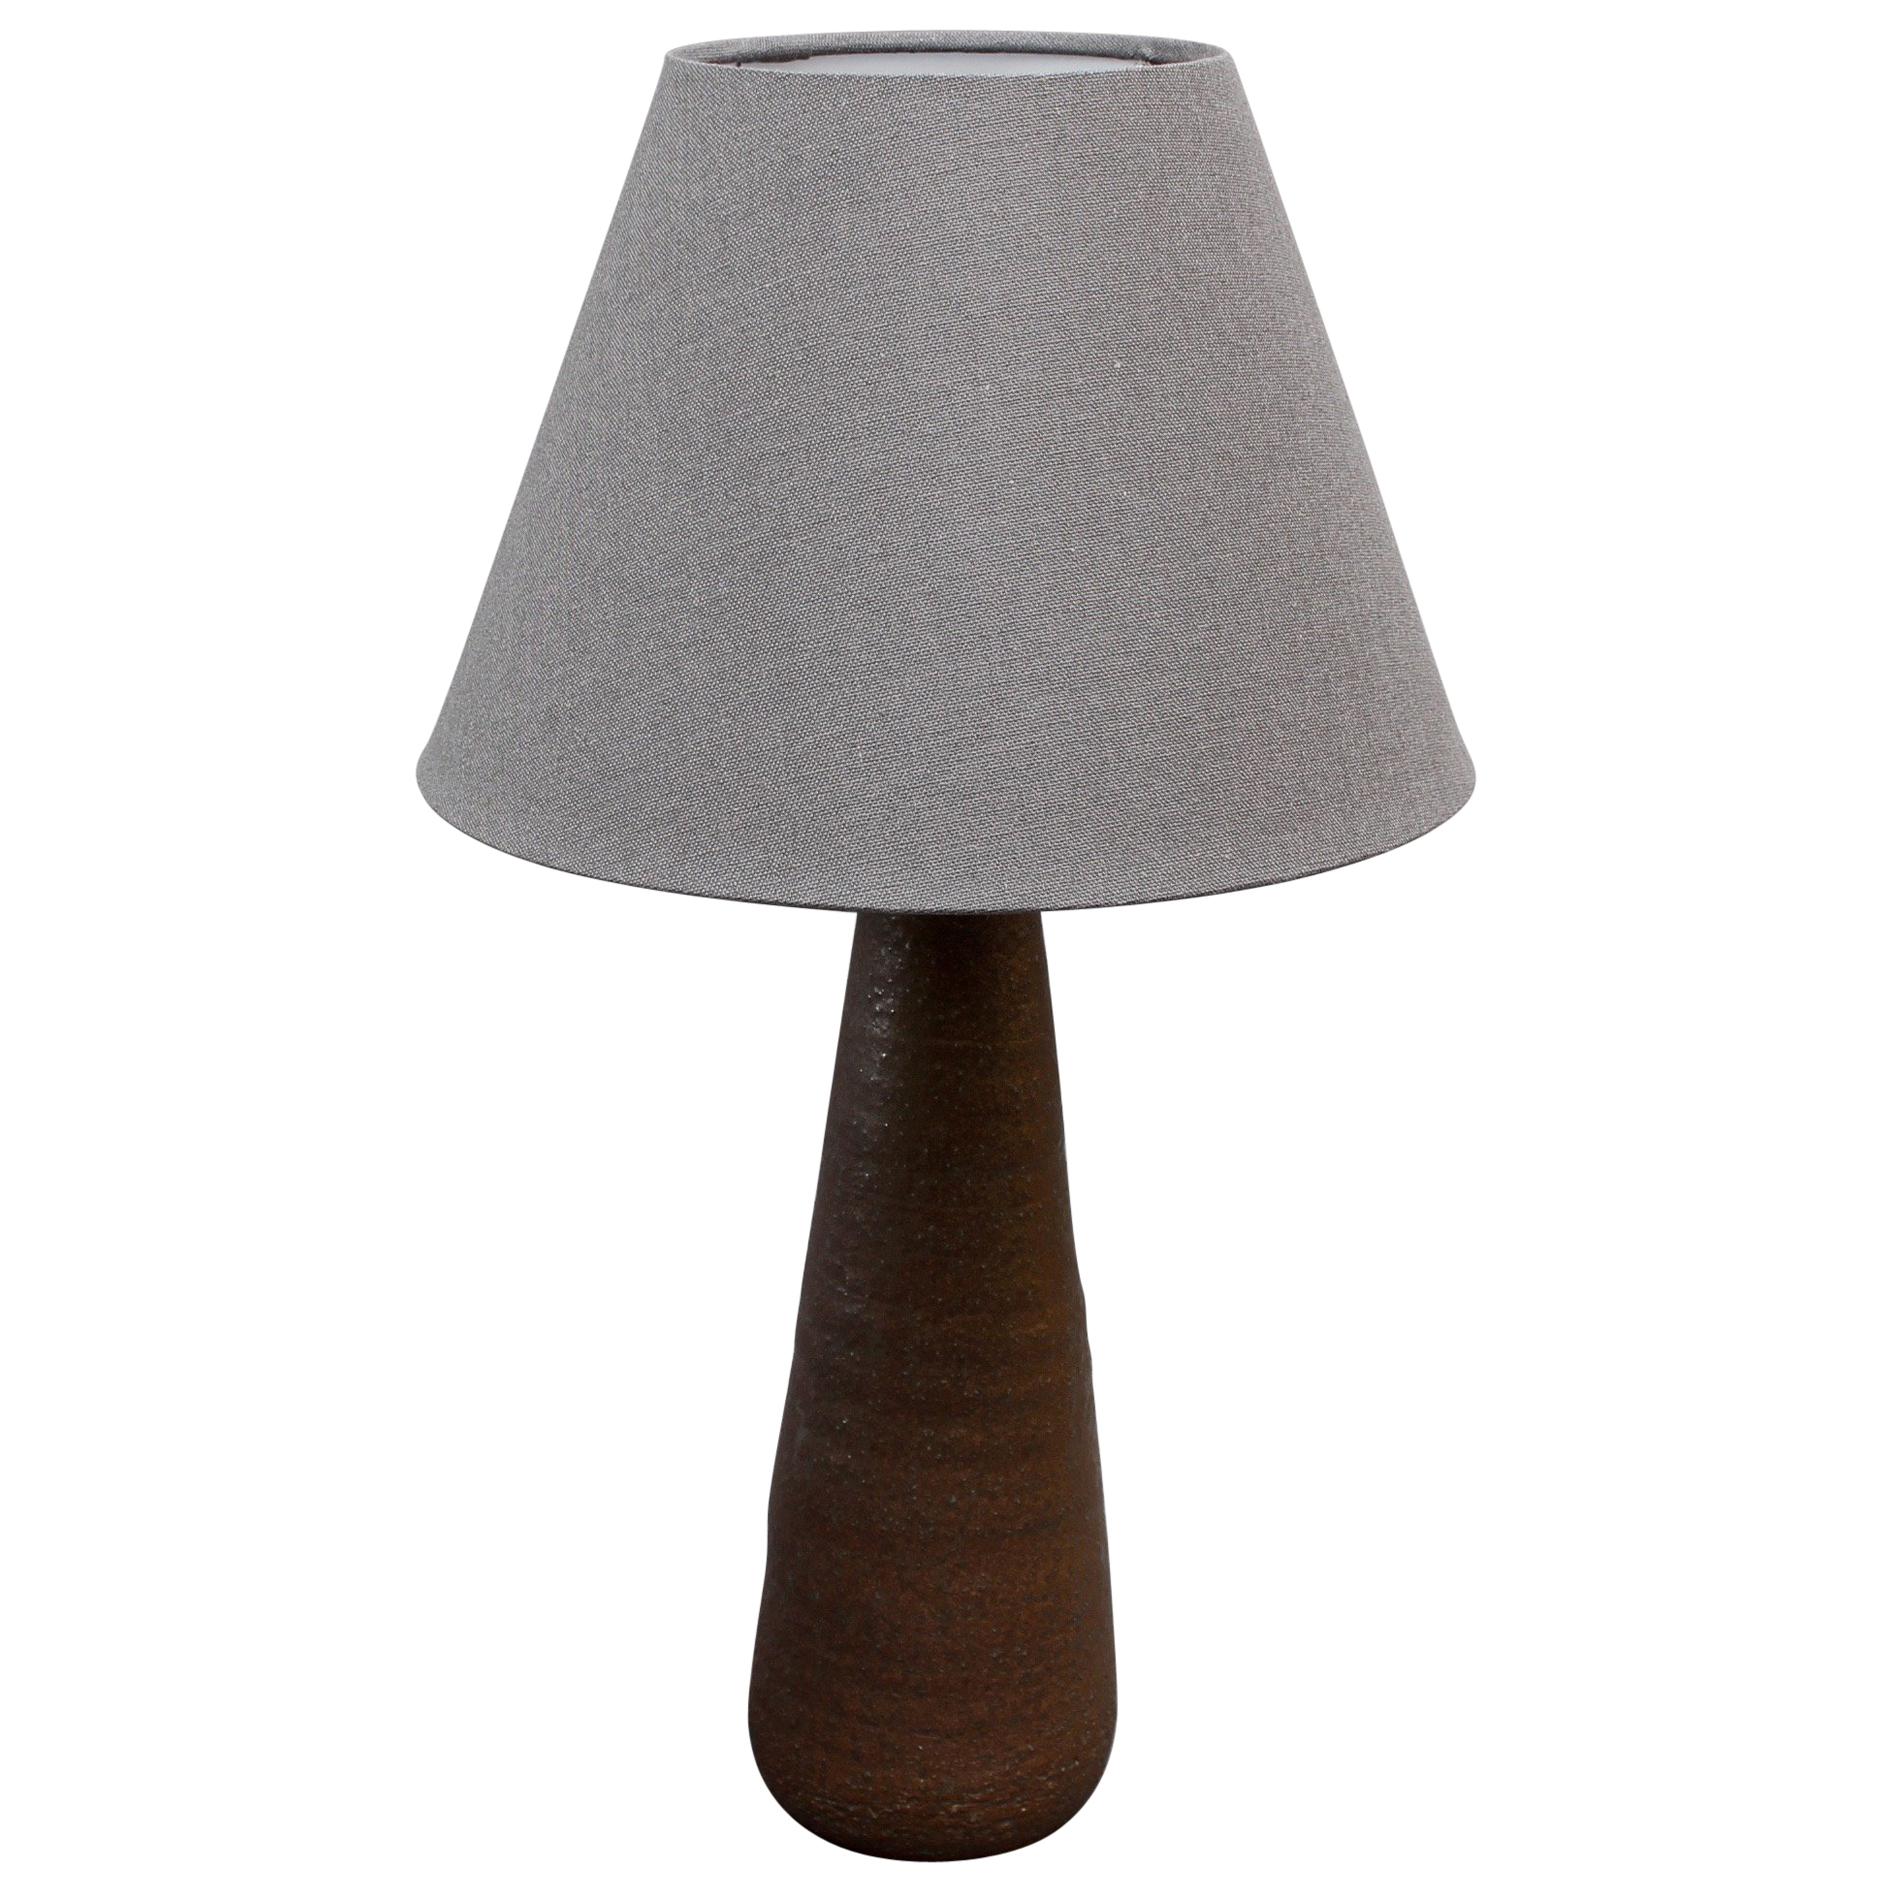 Midcentury French Conical Shaped Ceramic Table Lamp by Jean Rivier, circa 1960s